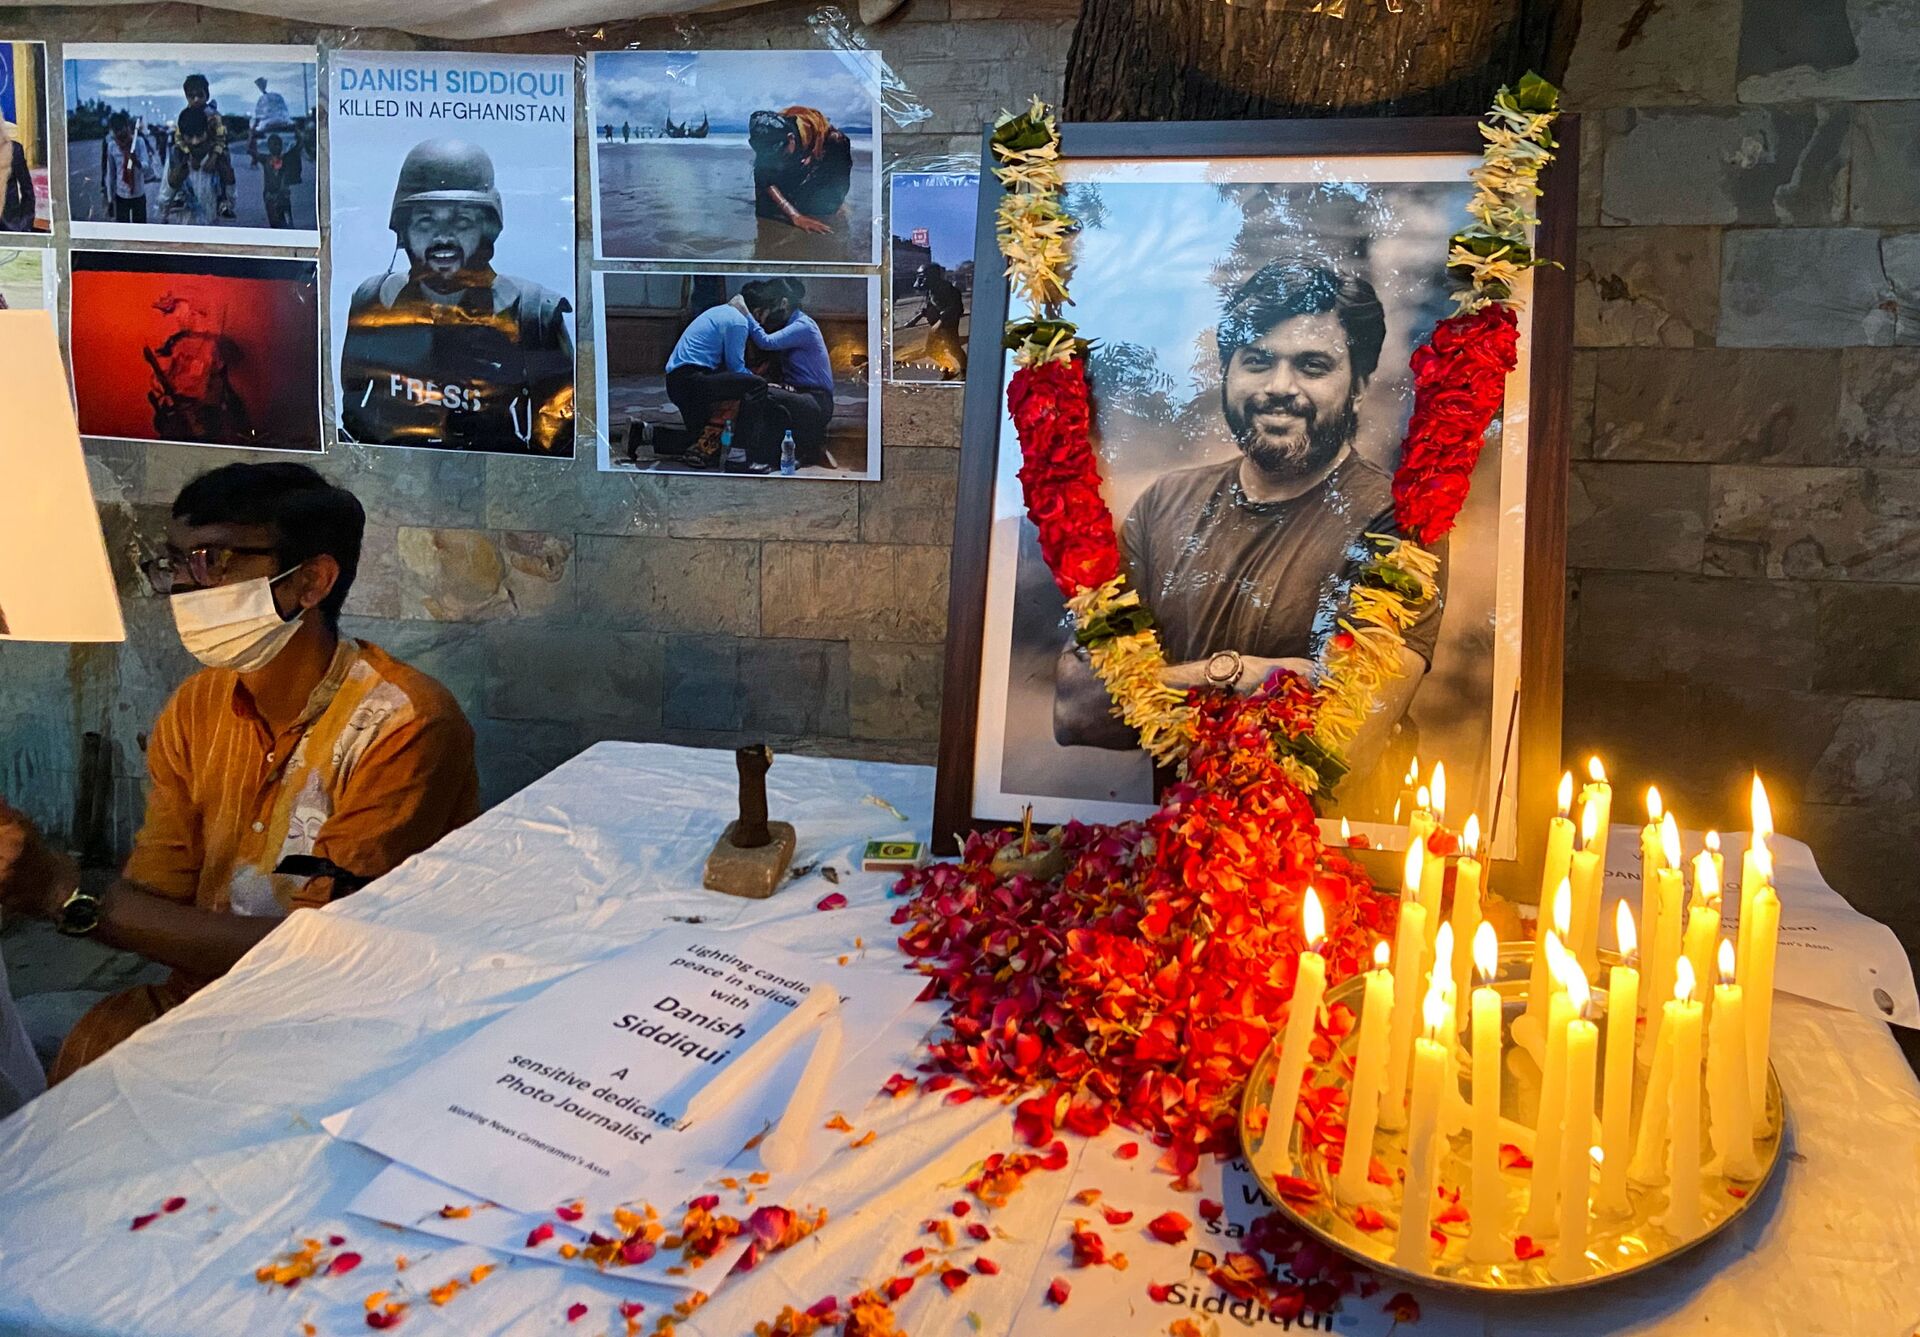 A man sits next to a memorial for Reuters journalist Danish Siddiqui, after he was killed while covering a clash between Afghan security forces and Taliban fighters near a border crossing with Pakistan, outside the Press Club in New Delhi, India, July 17, 2021.  - Sputnik International, 1920, 07.09.2021